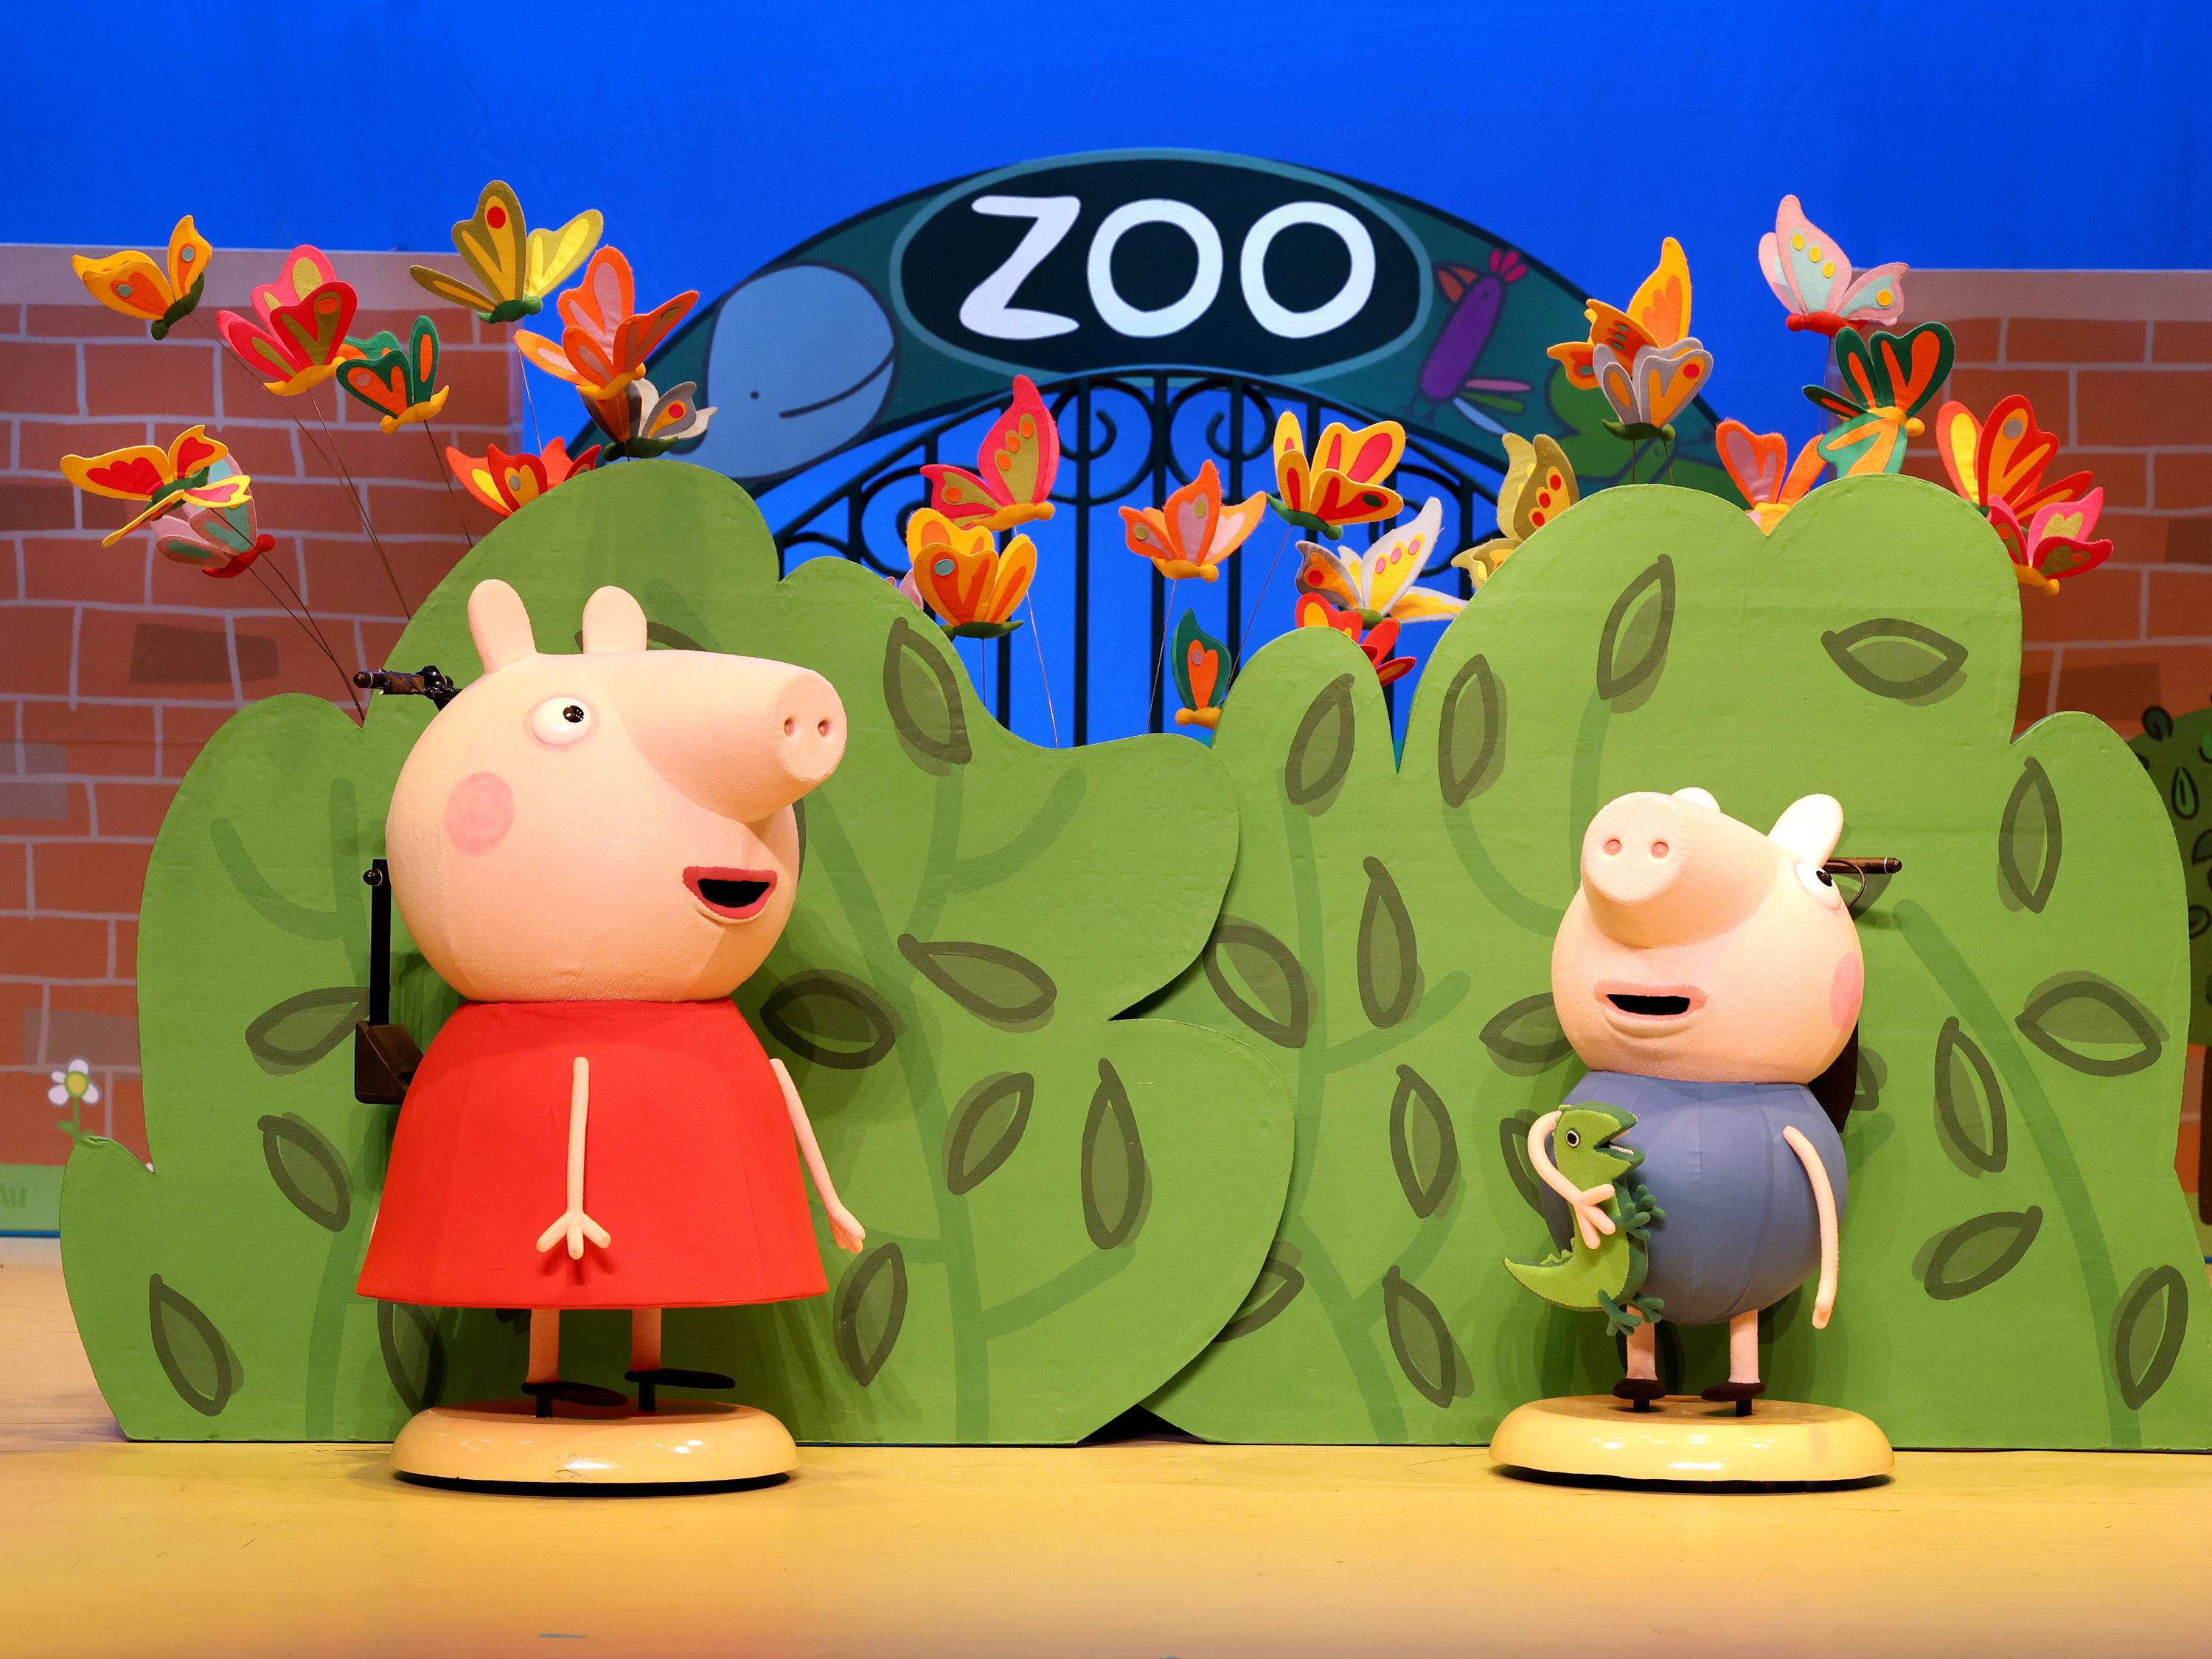 Peppa Pig and George Pig stood in front of a zoo sign